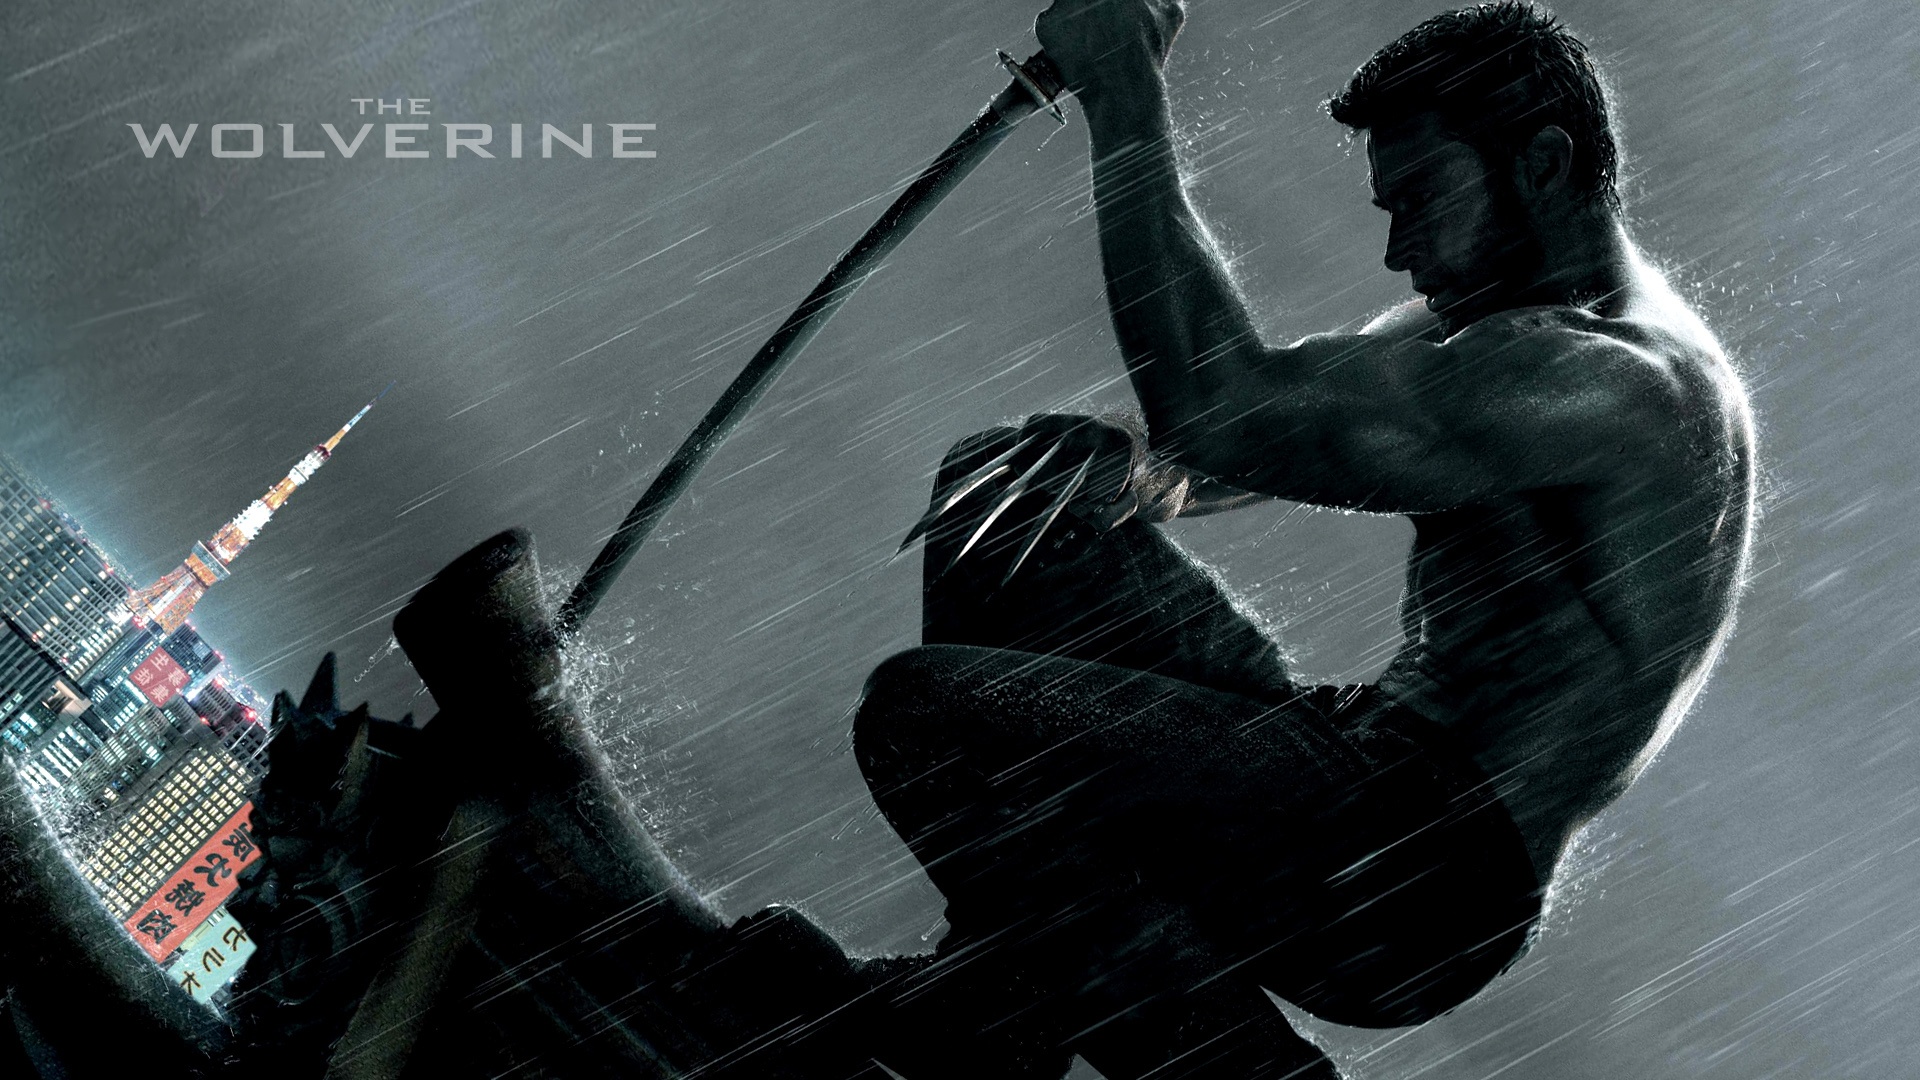 Wolverine HD Wallpapers - HD Wallpapers Backgrounds of Your Choice